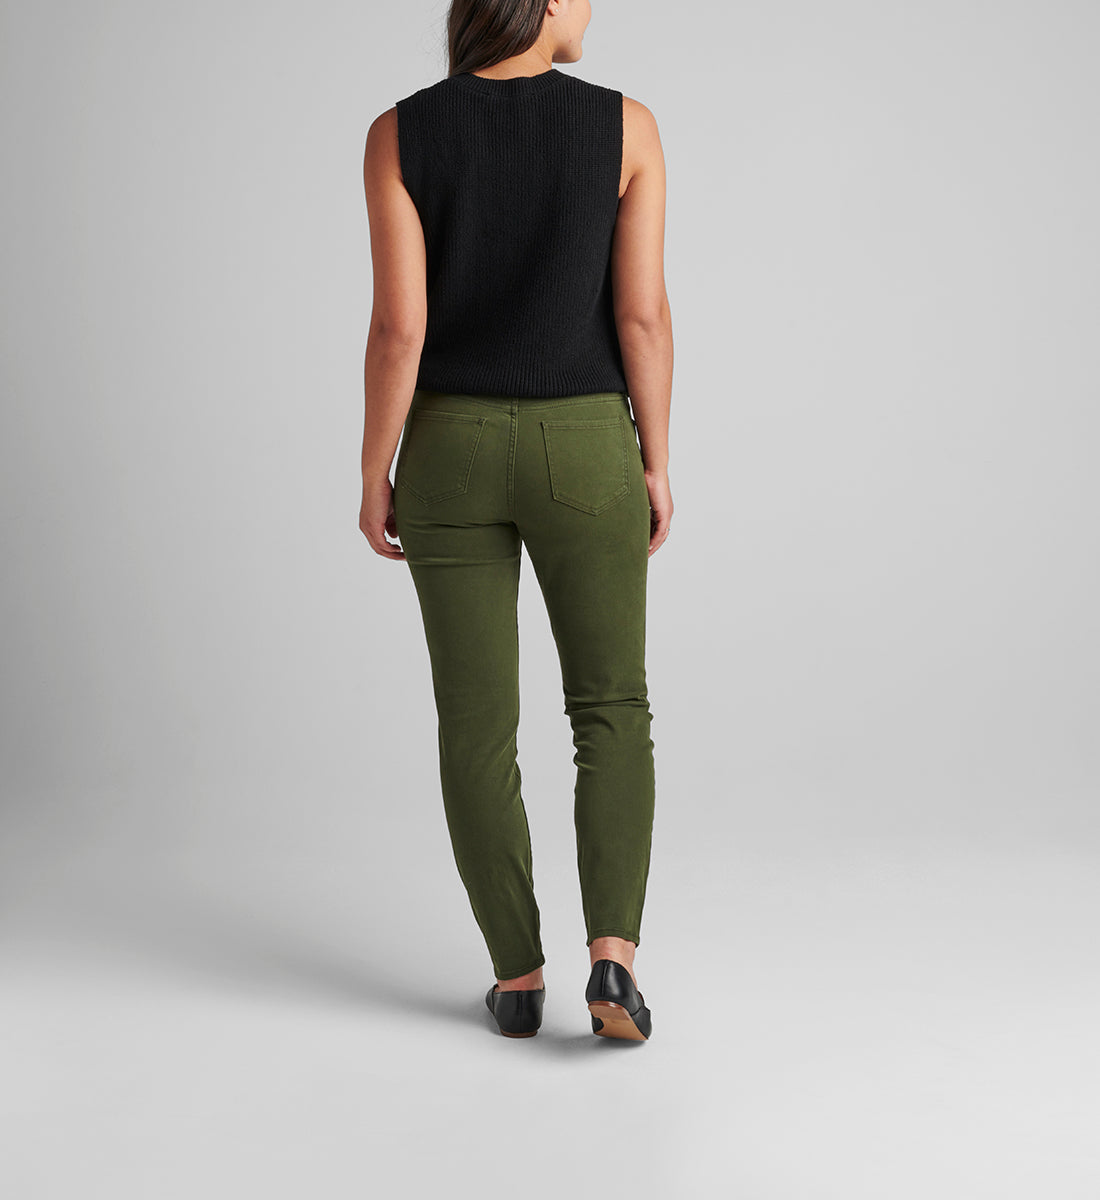 Jag Jeans Cecilia Mid Rise Skinny - Military Green